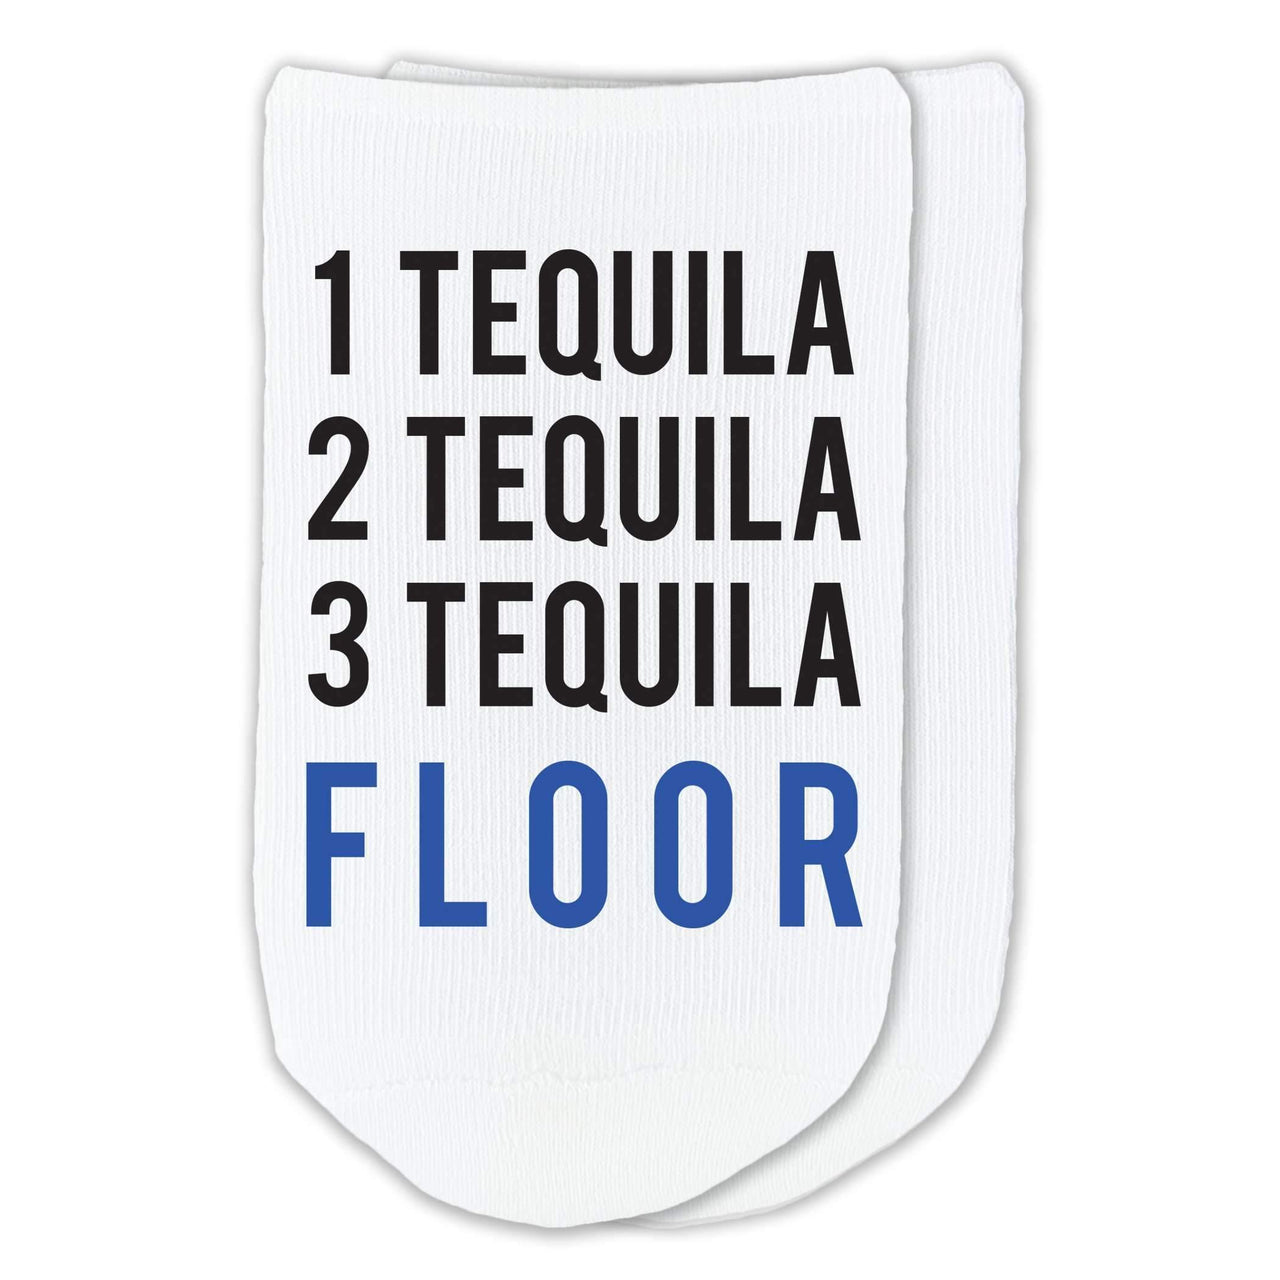 One tequila two tequila three tequila floor custom printed on no show socks.